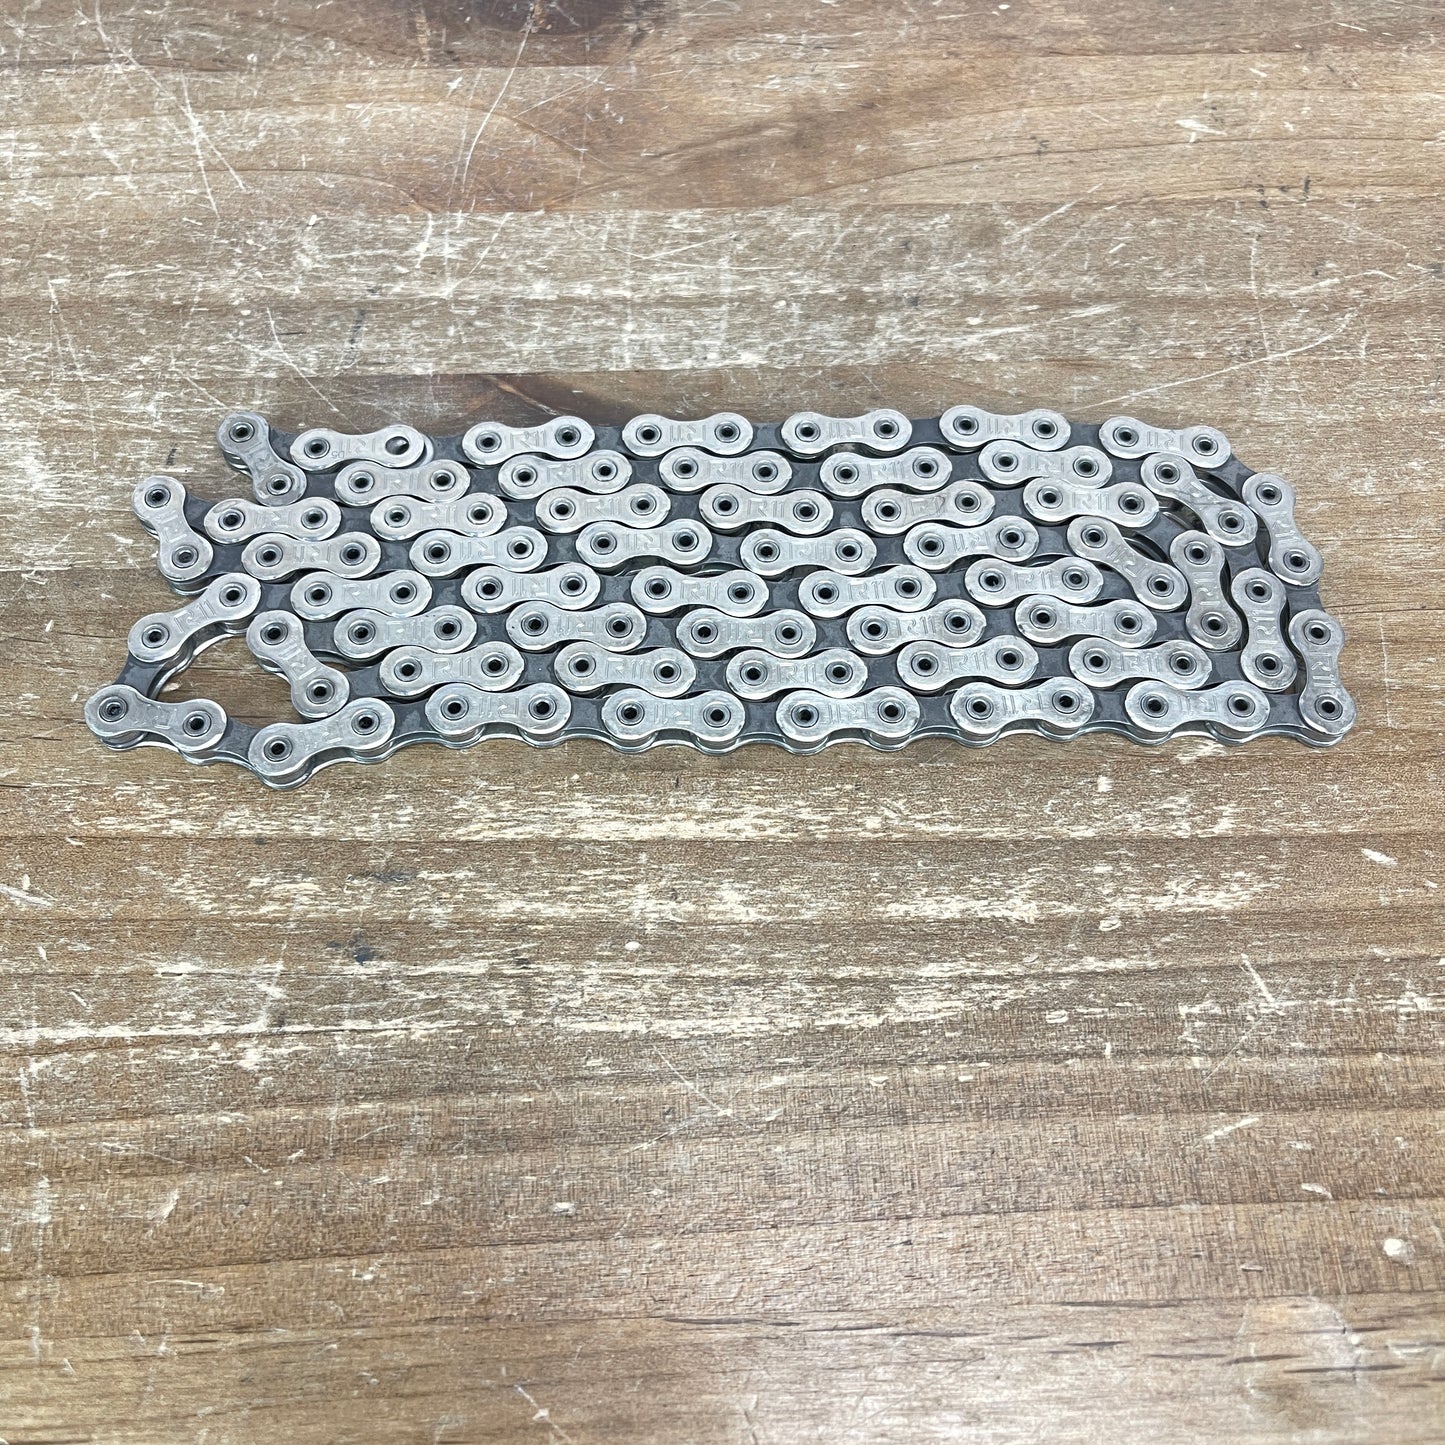 Campagnolo Record 11 Bike Chain 11-Speed - Various Lengths Available